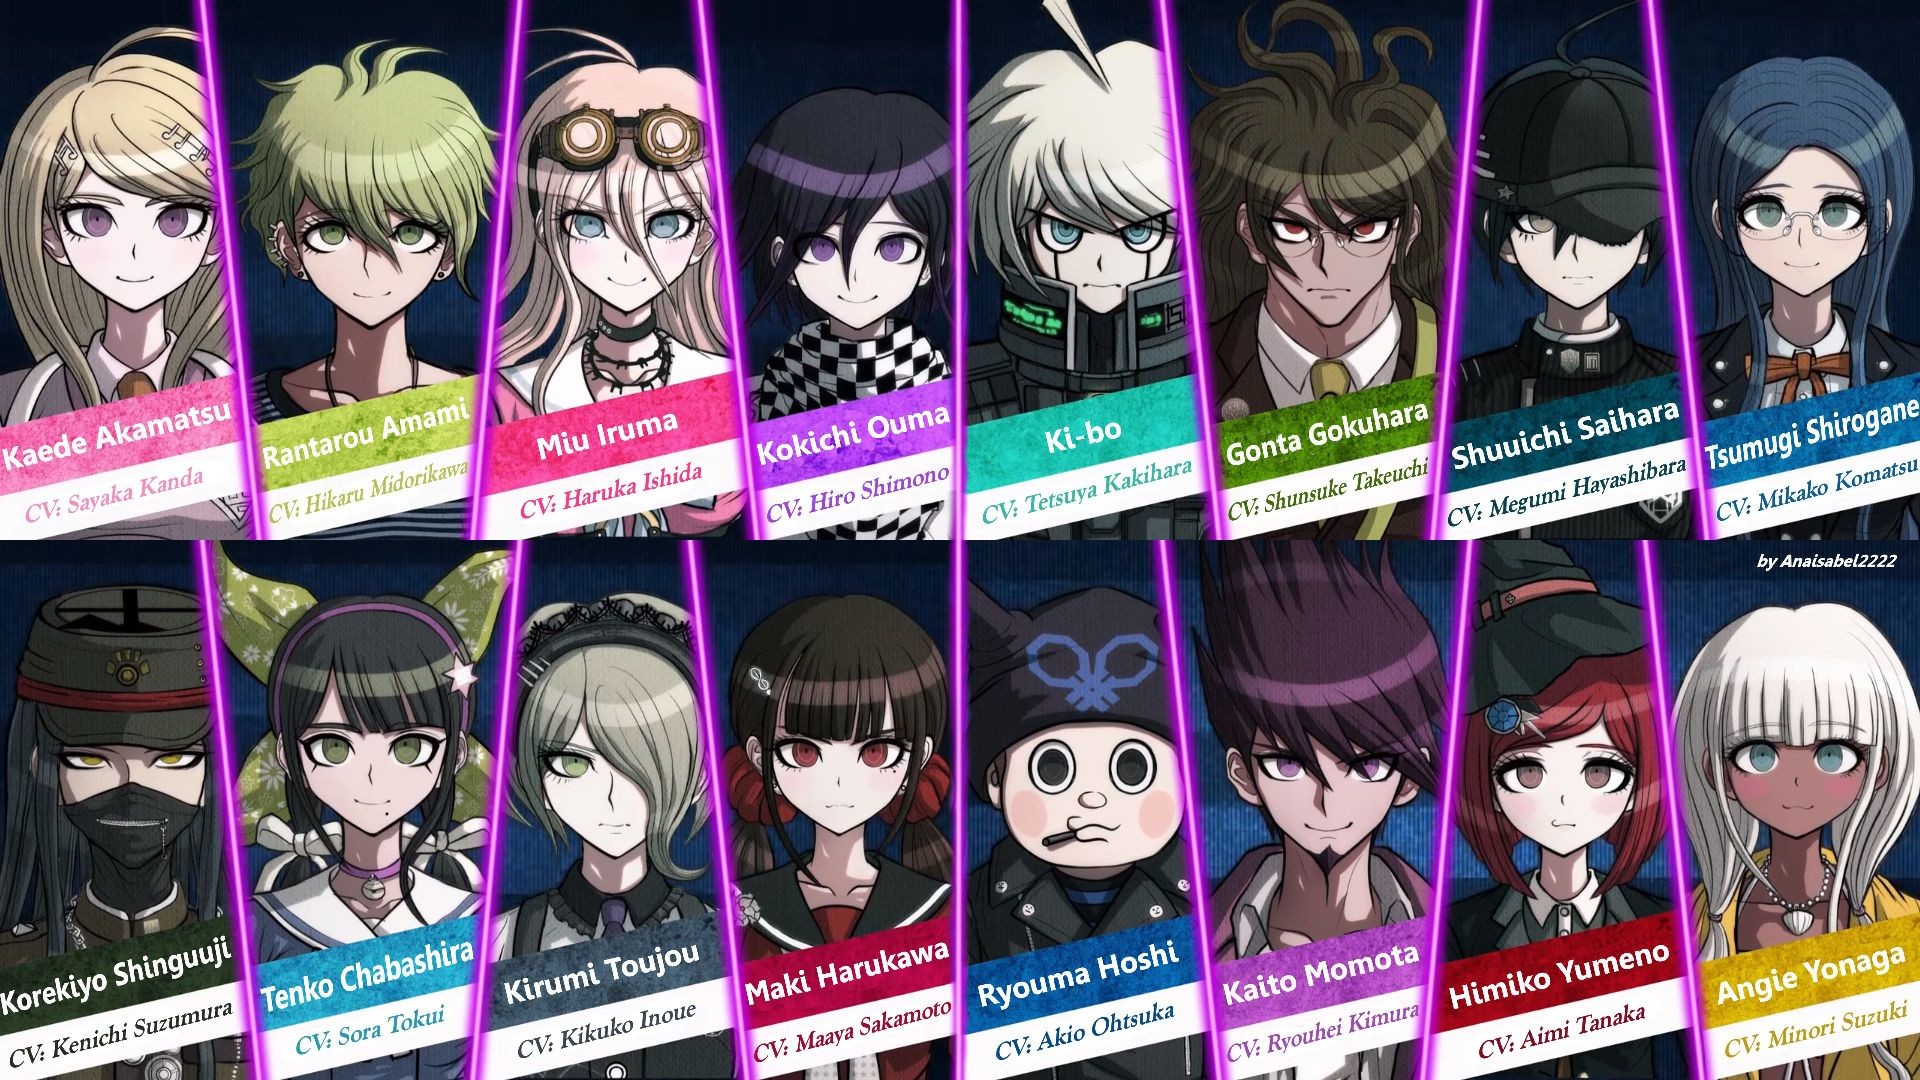 1920x1080 [NDRV3] HQ Wallpapers using the sprites provided by the new trailer!!